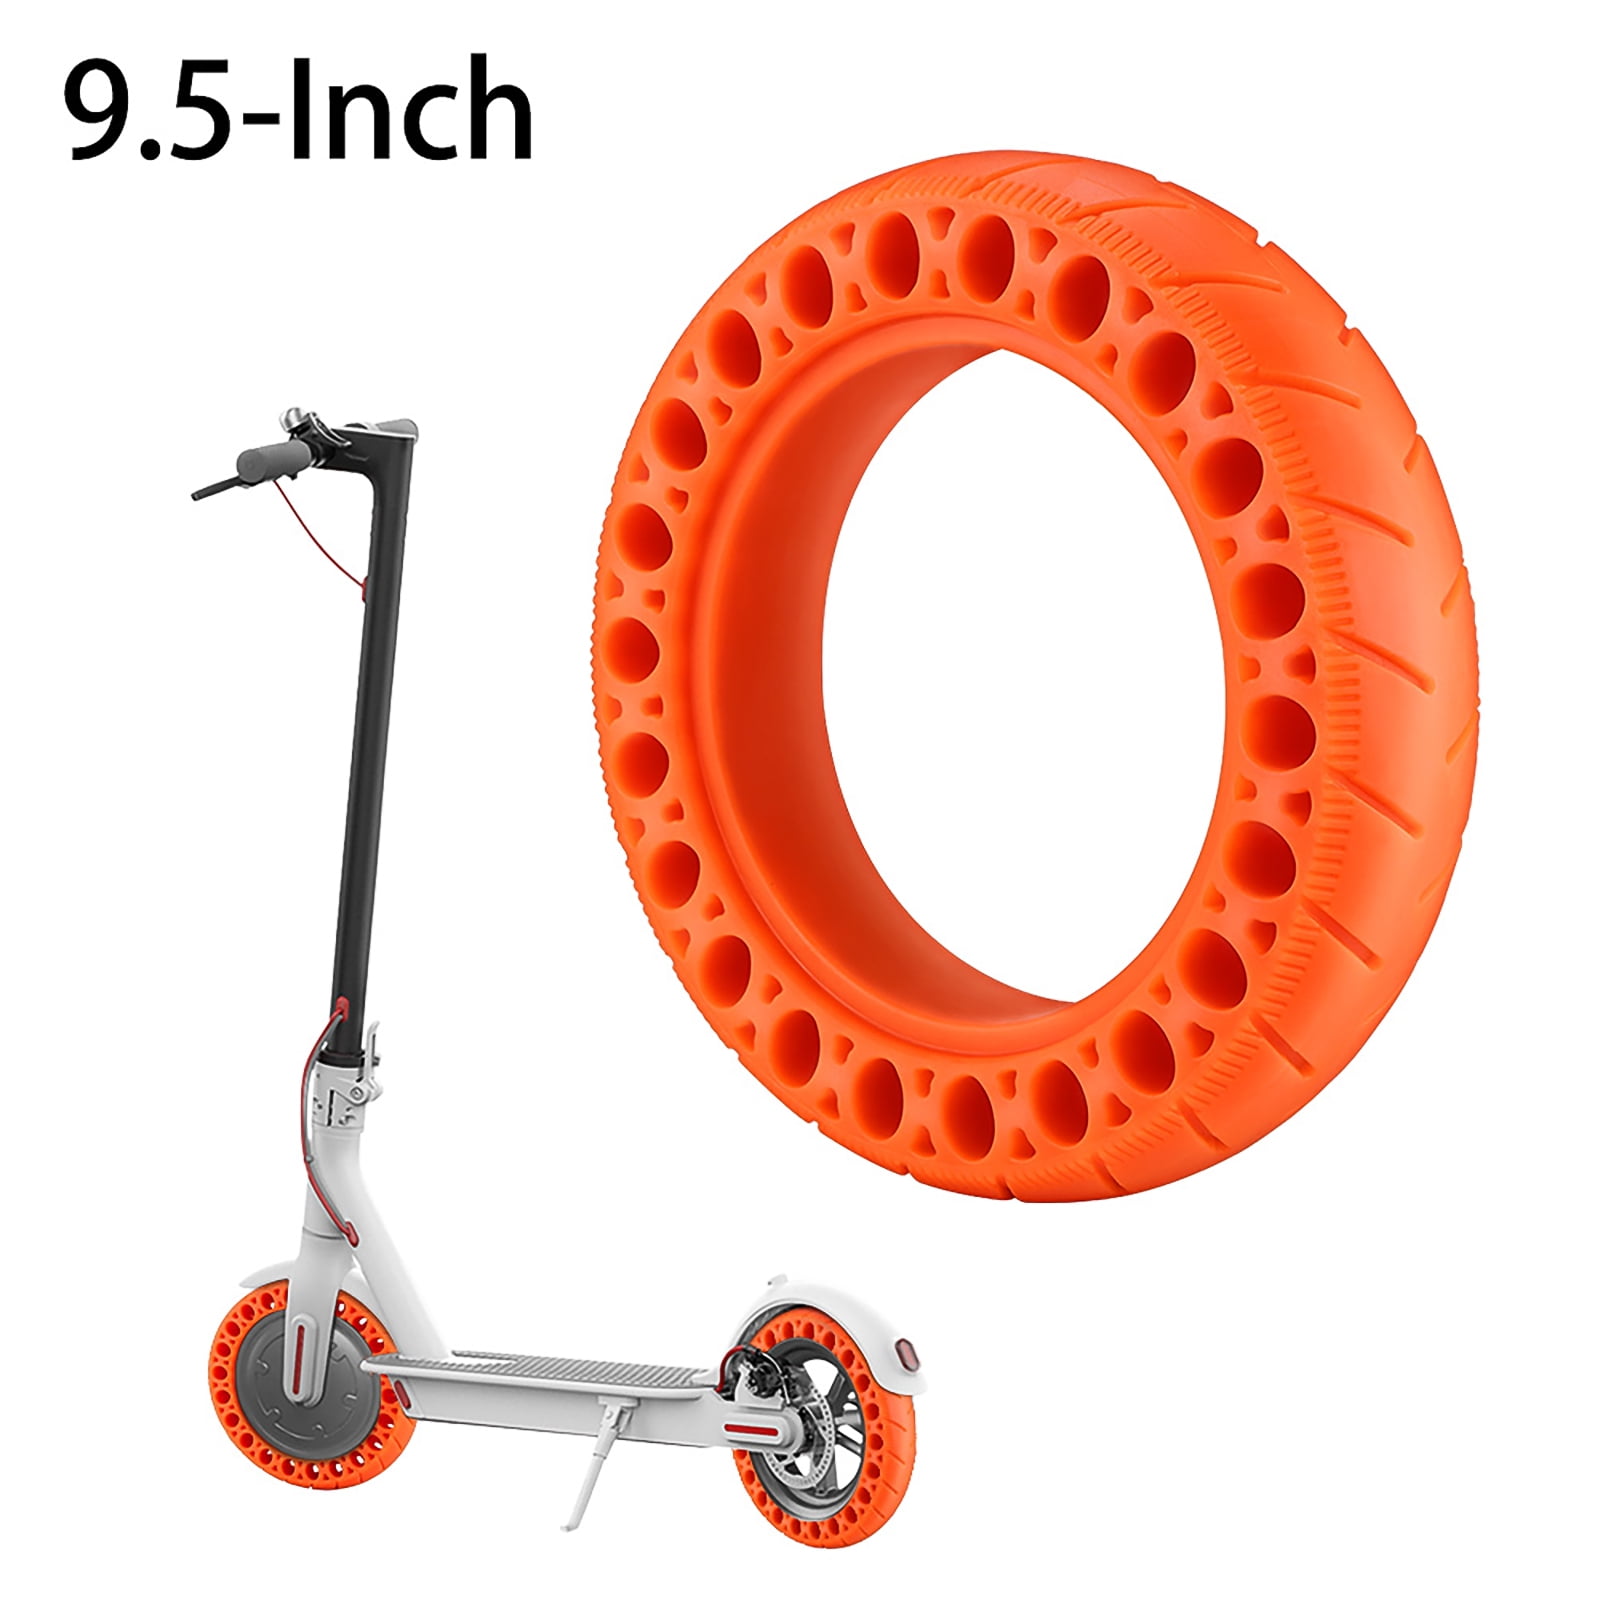 Solid Tire Wheel Hub Explosion-Proof Tyre for Xiaomi M365/Pro Electric Scooter 